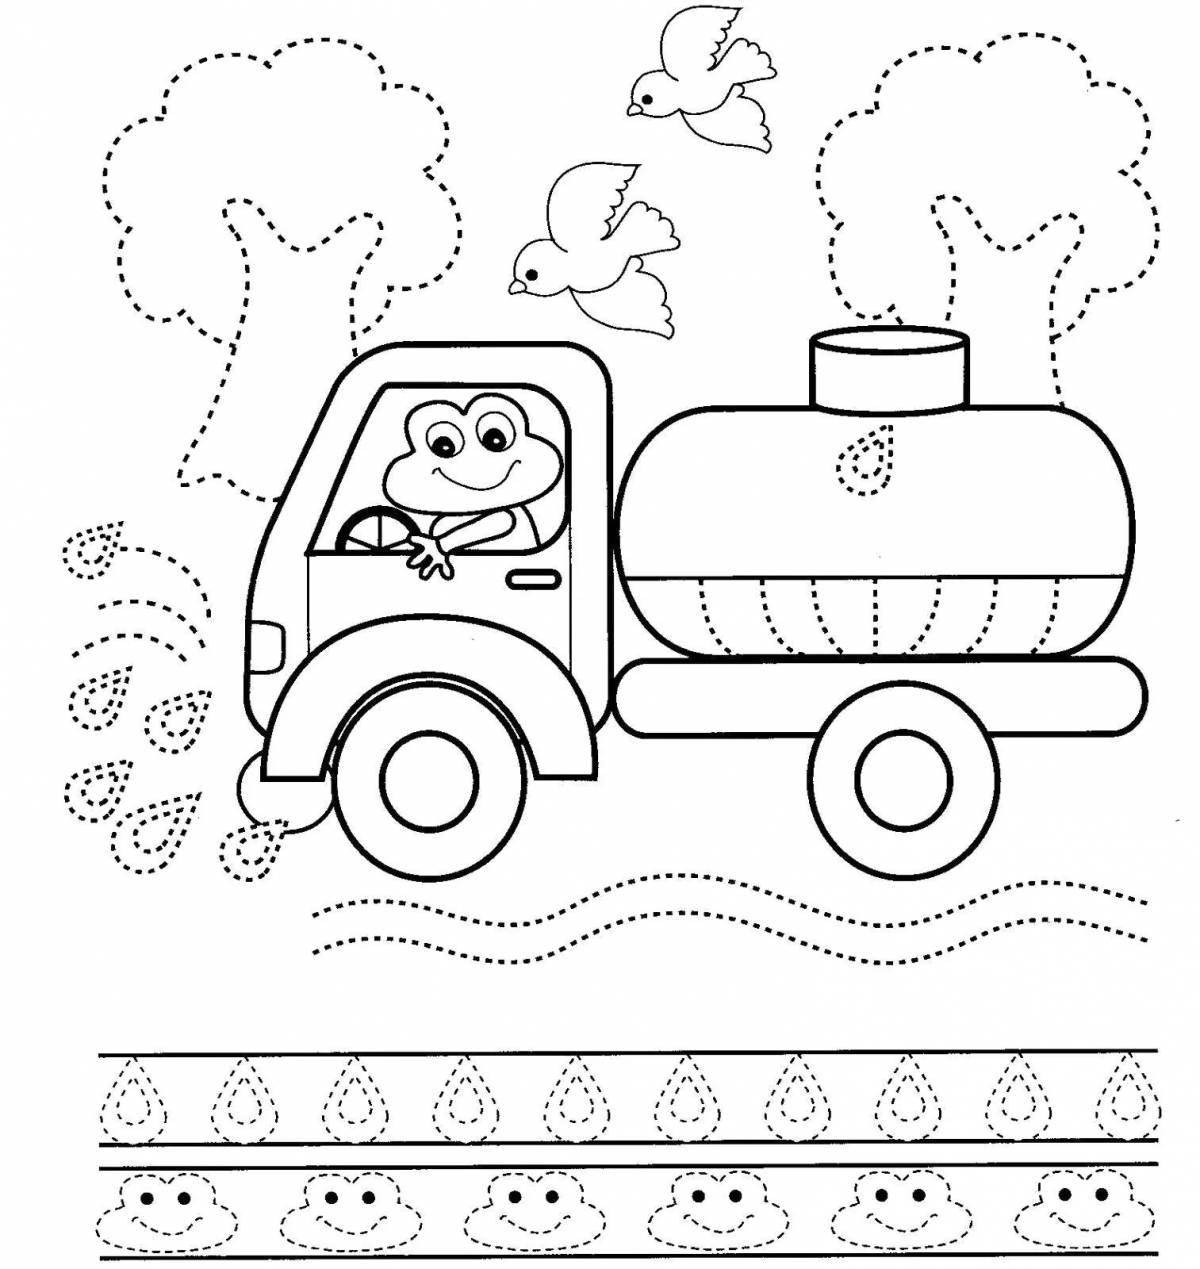 Intriguing coloring page 6 years of development